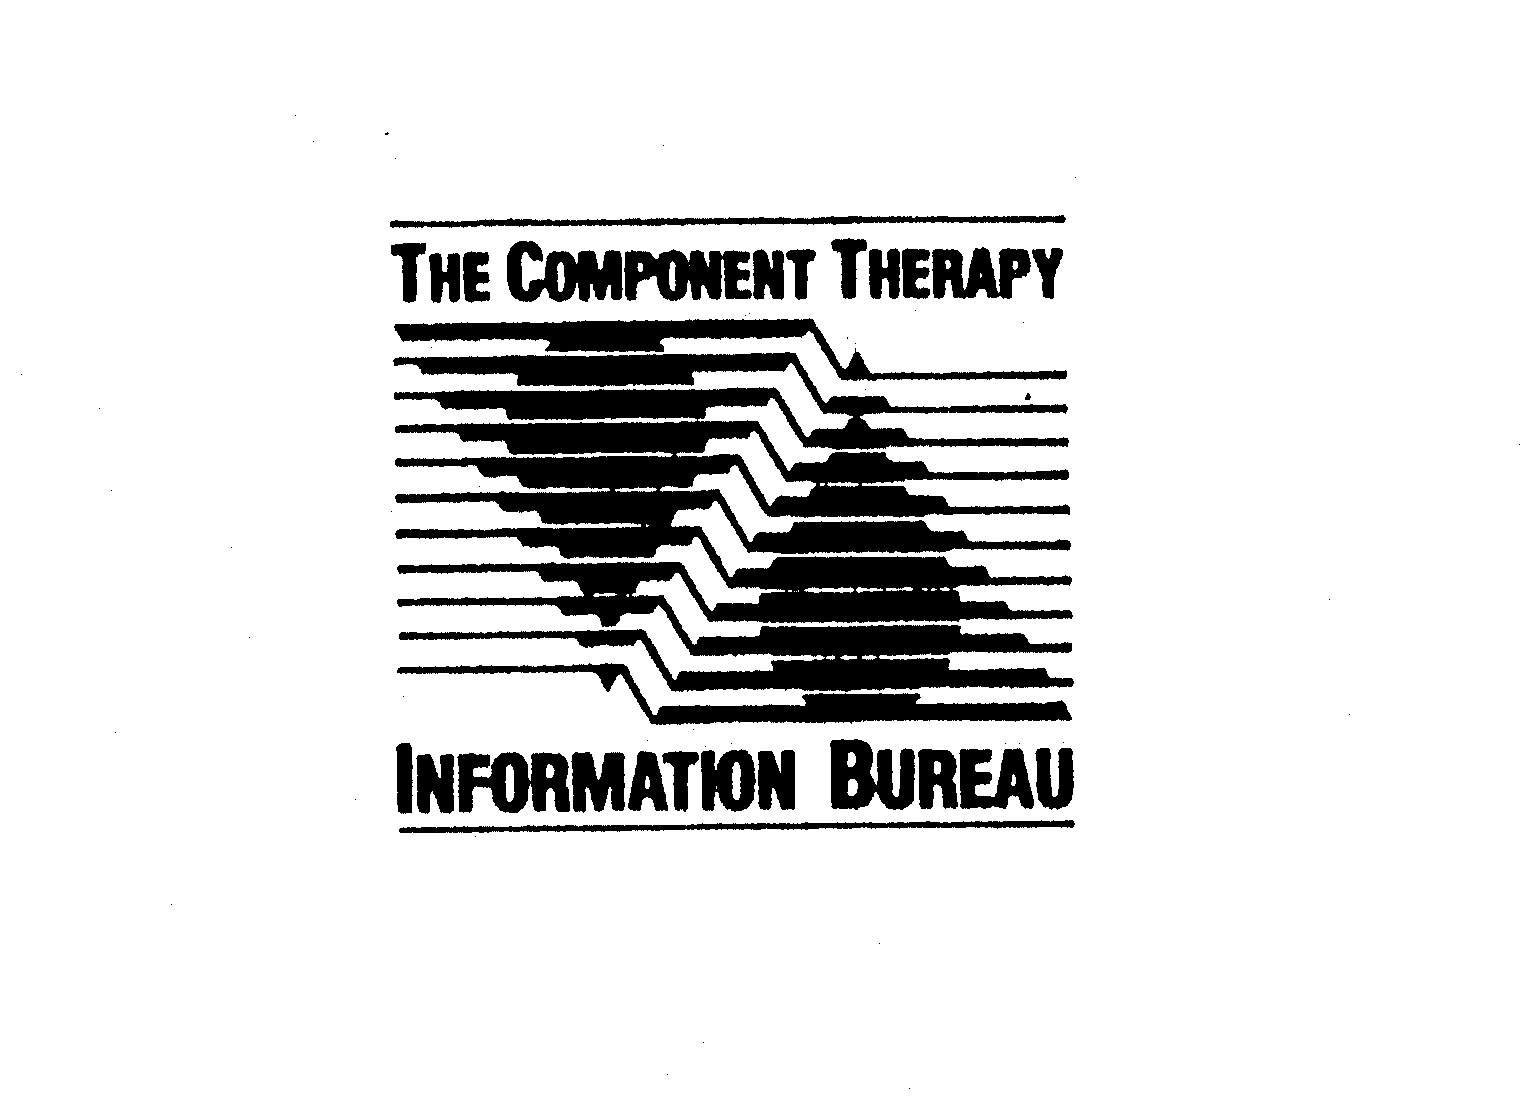  THE COMPONENT THERAPY INFORMATION BUREAU